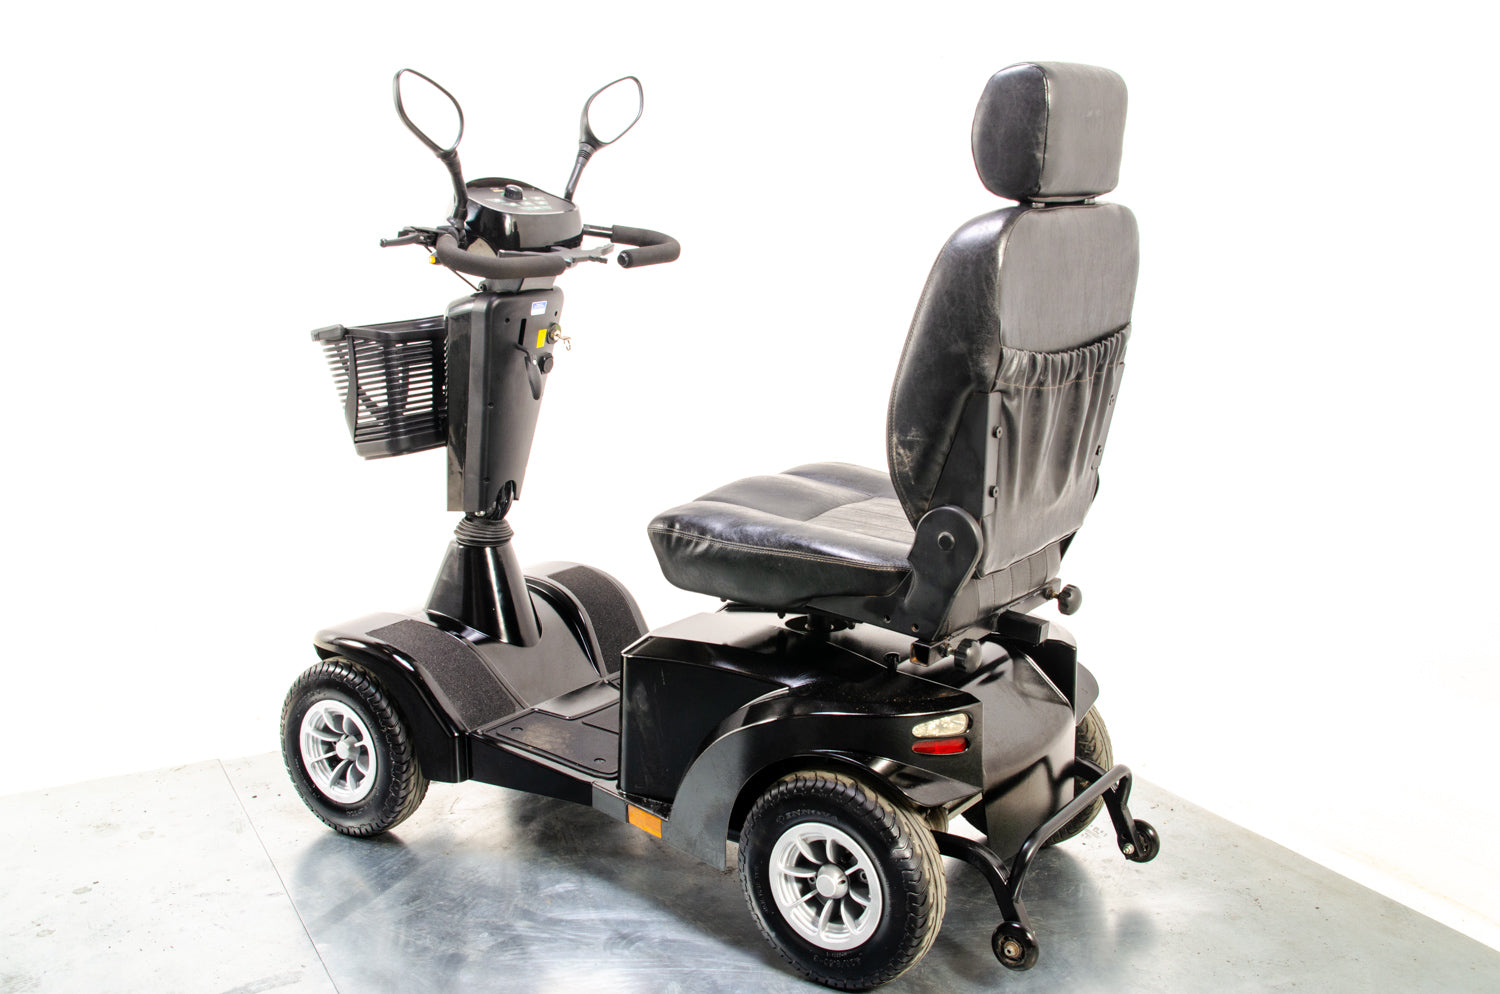 Sterling S700 All-Terrain Off-Road Used Mobility Scooter Large 8mph Sunrise Medical Black 13525